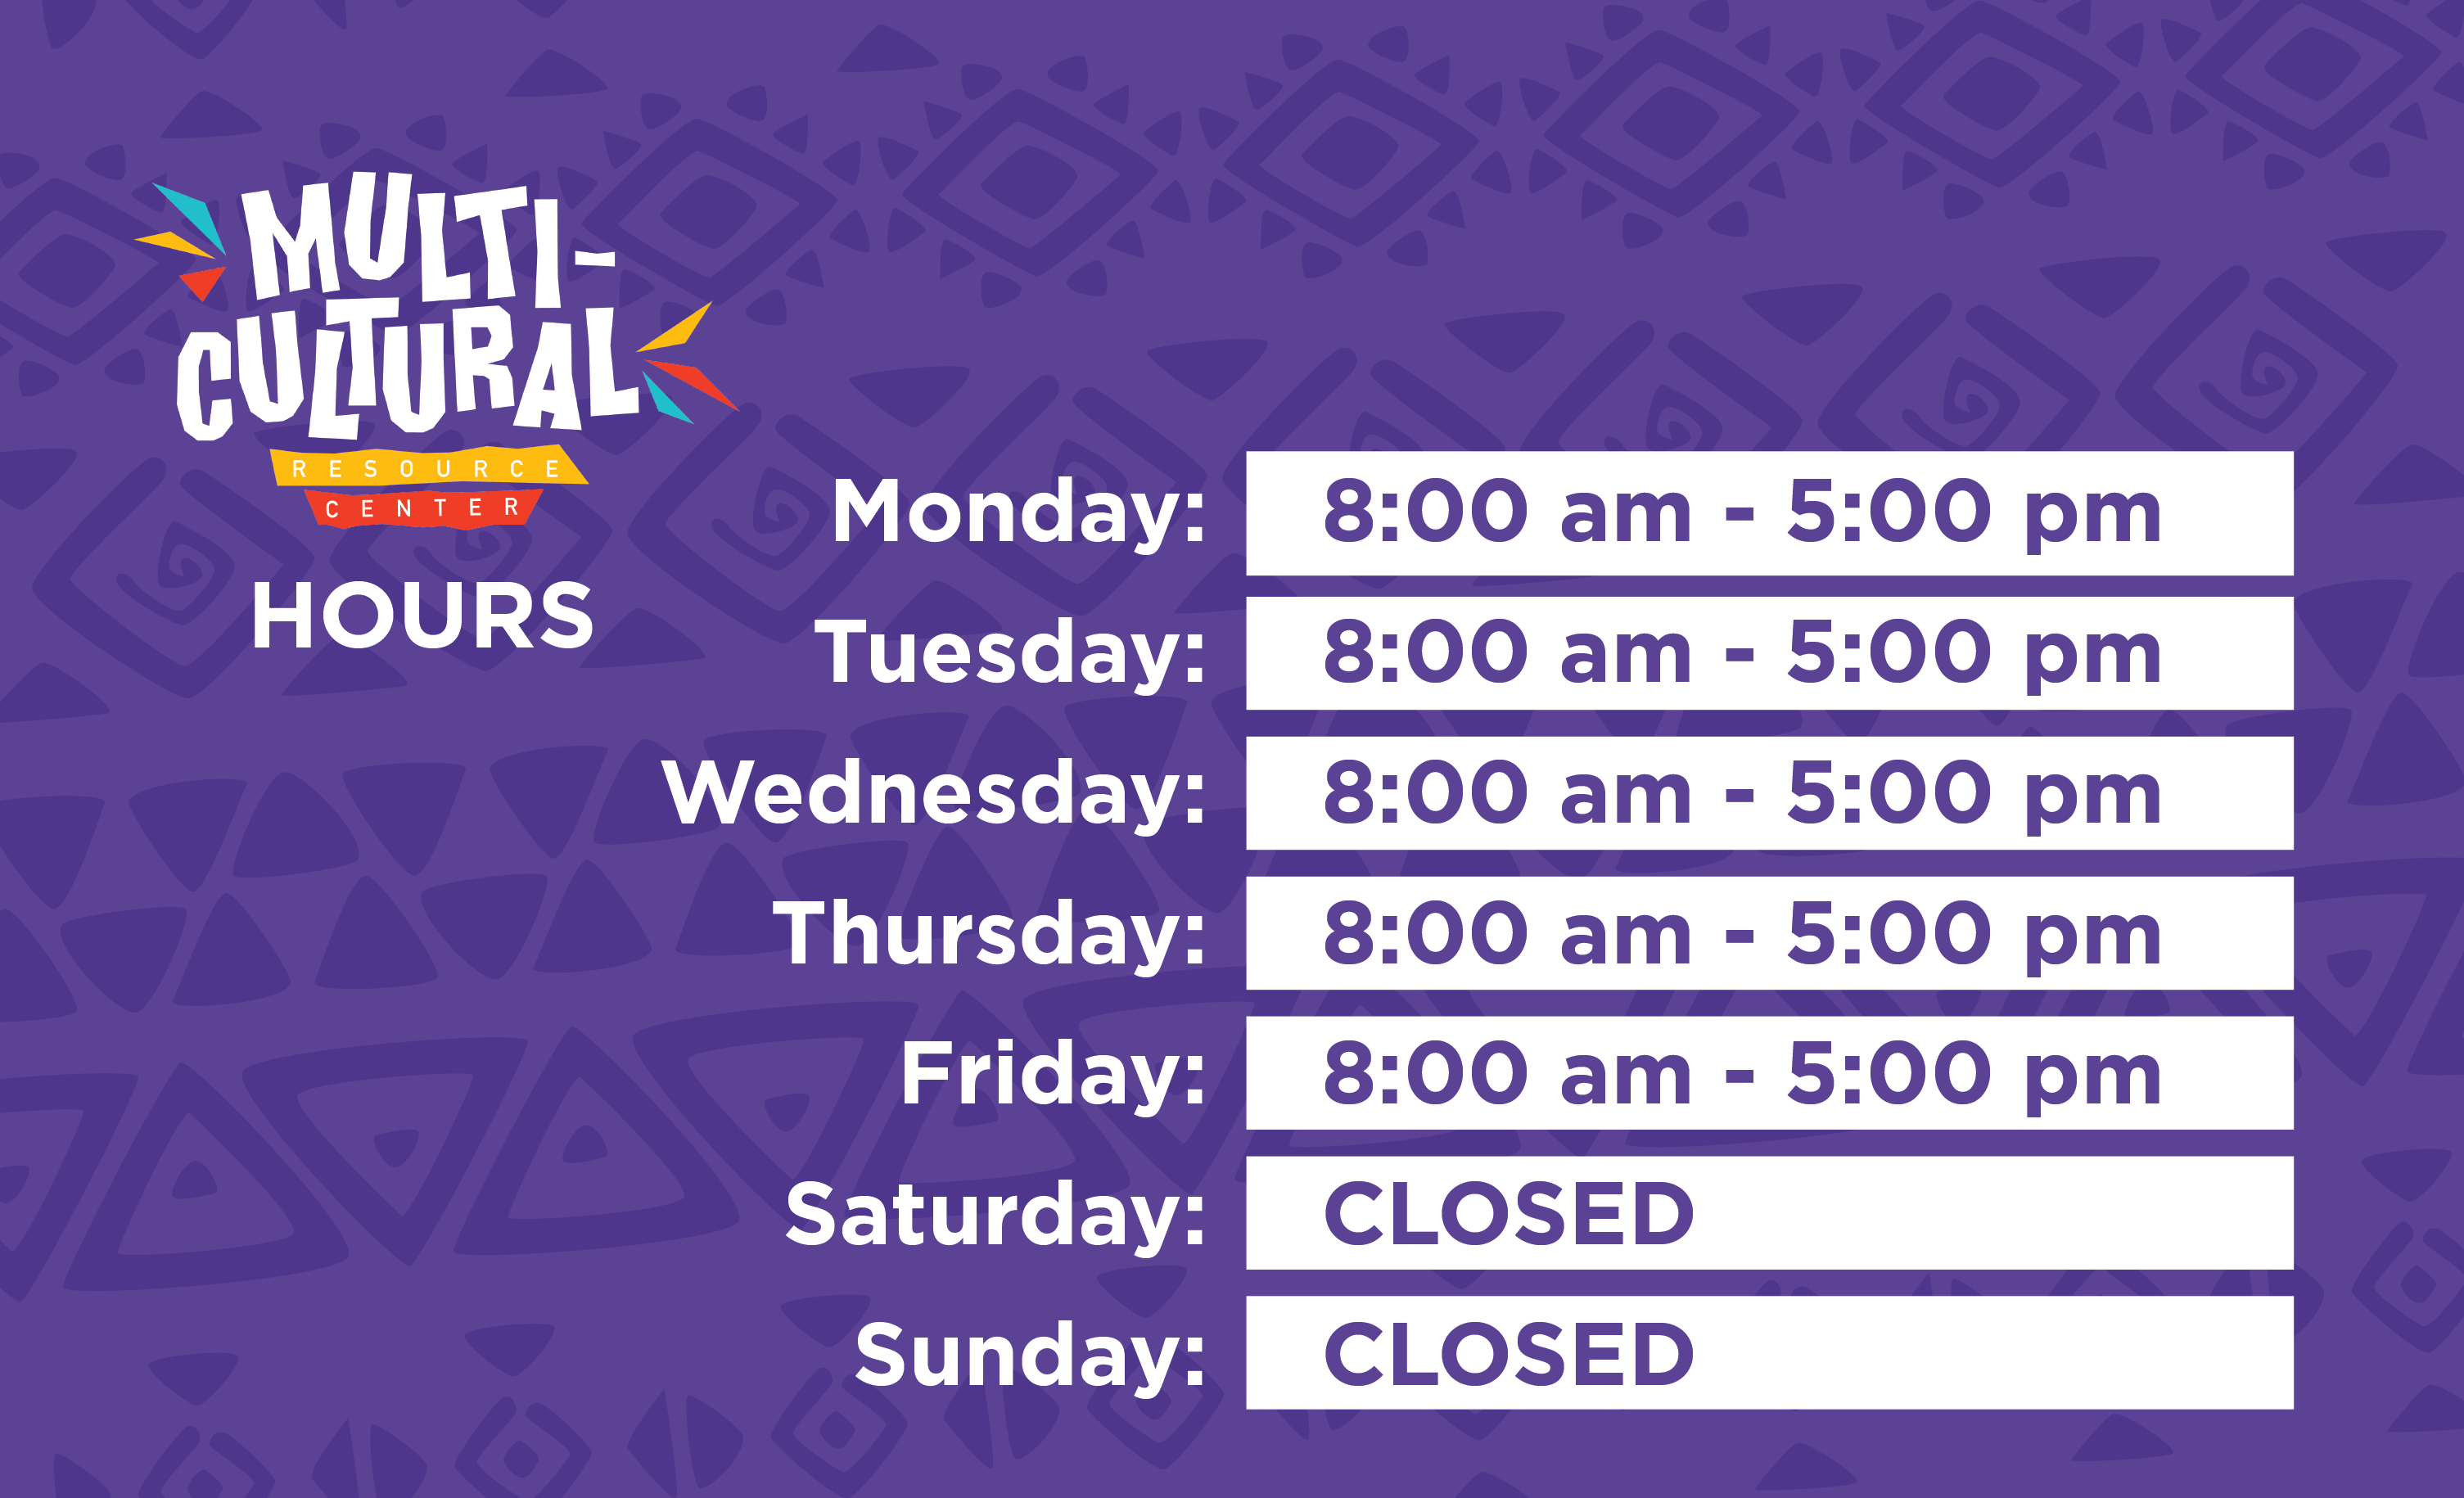 Multicultural Resource Center Hours Monday through Friday 8am-5pm, Closed on the Weekends